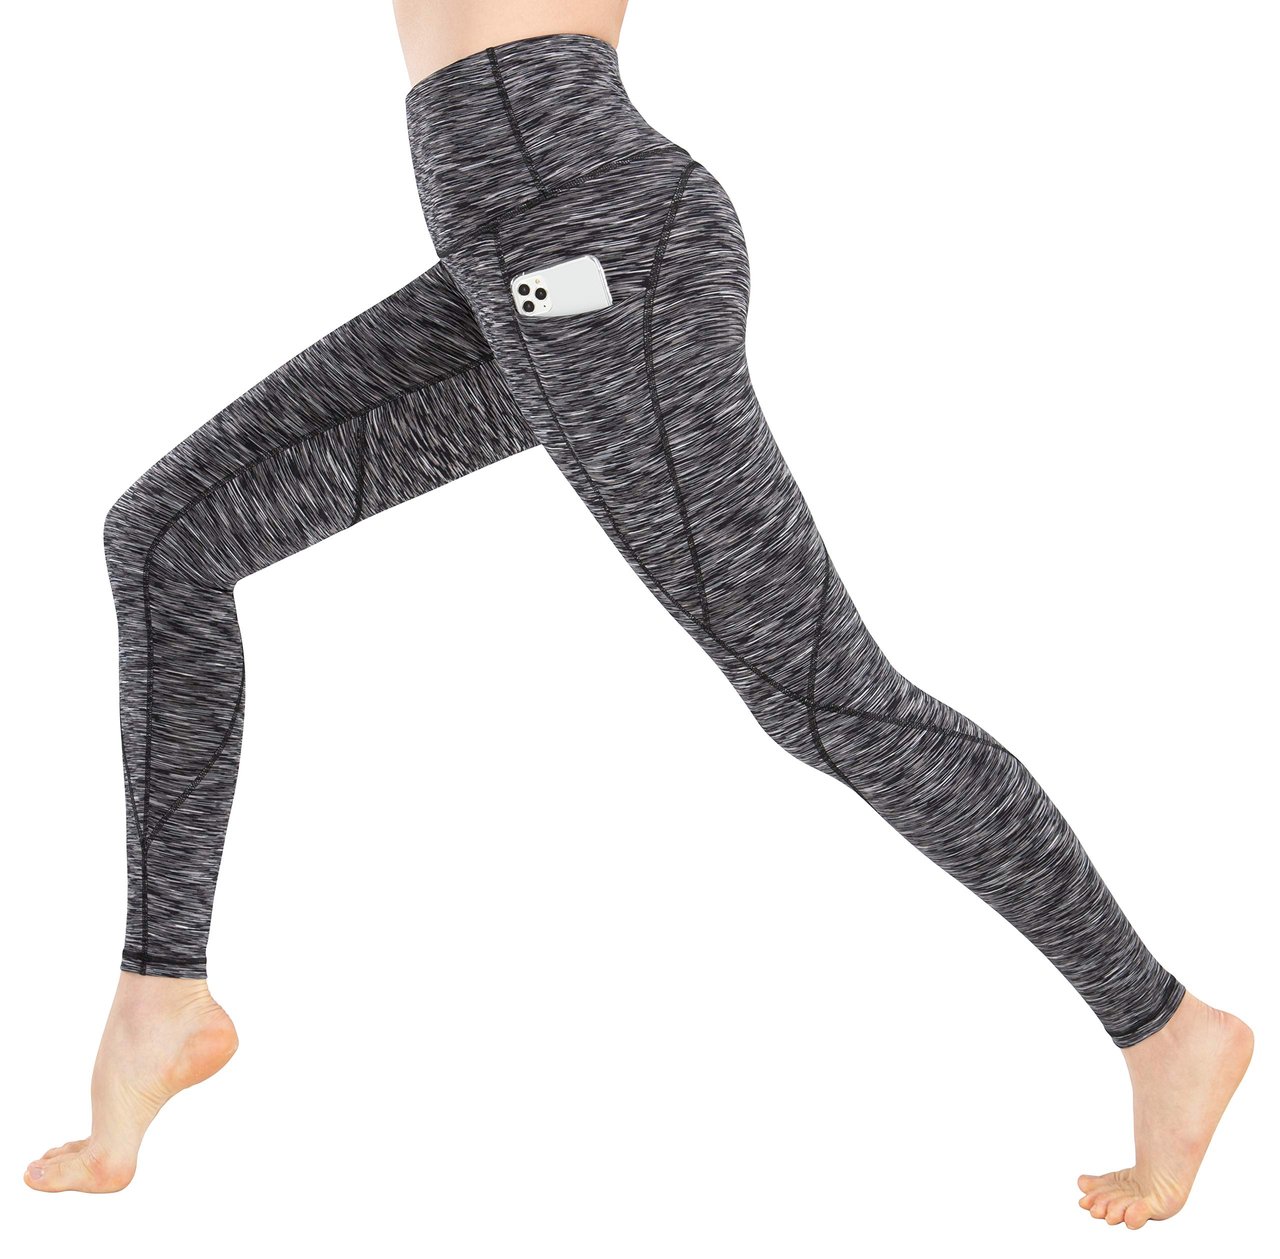 1 iKeep Leggings with Pockets for Women